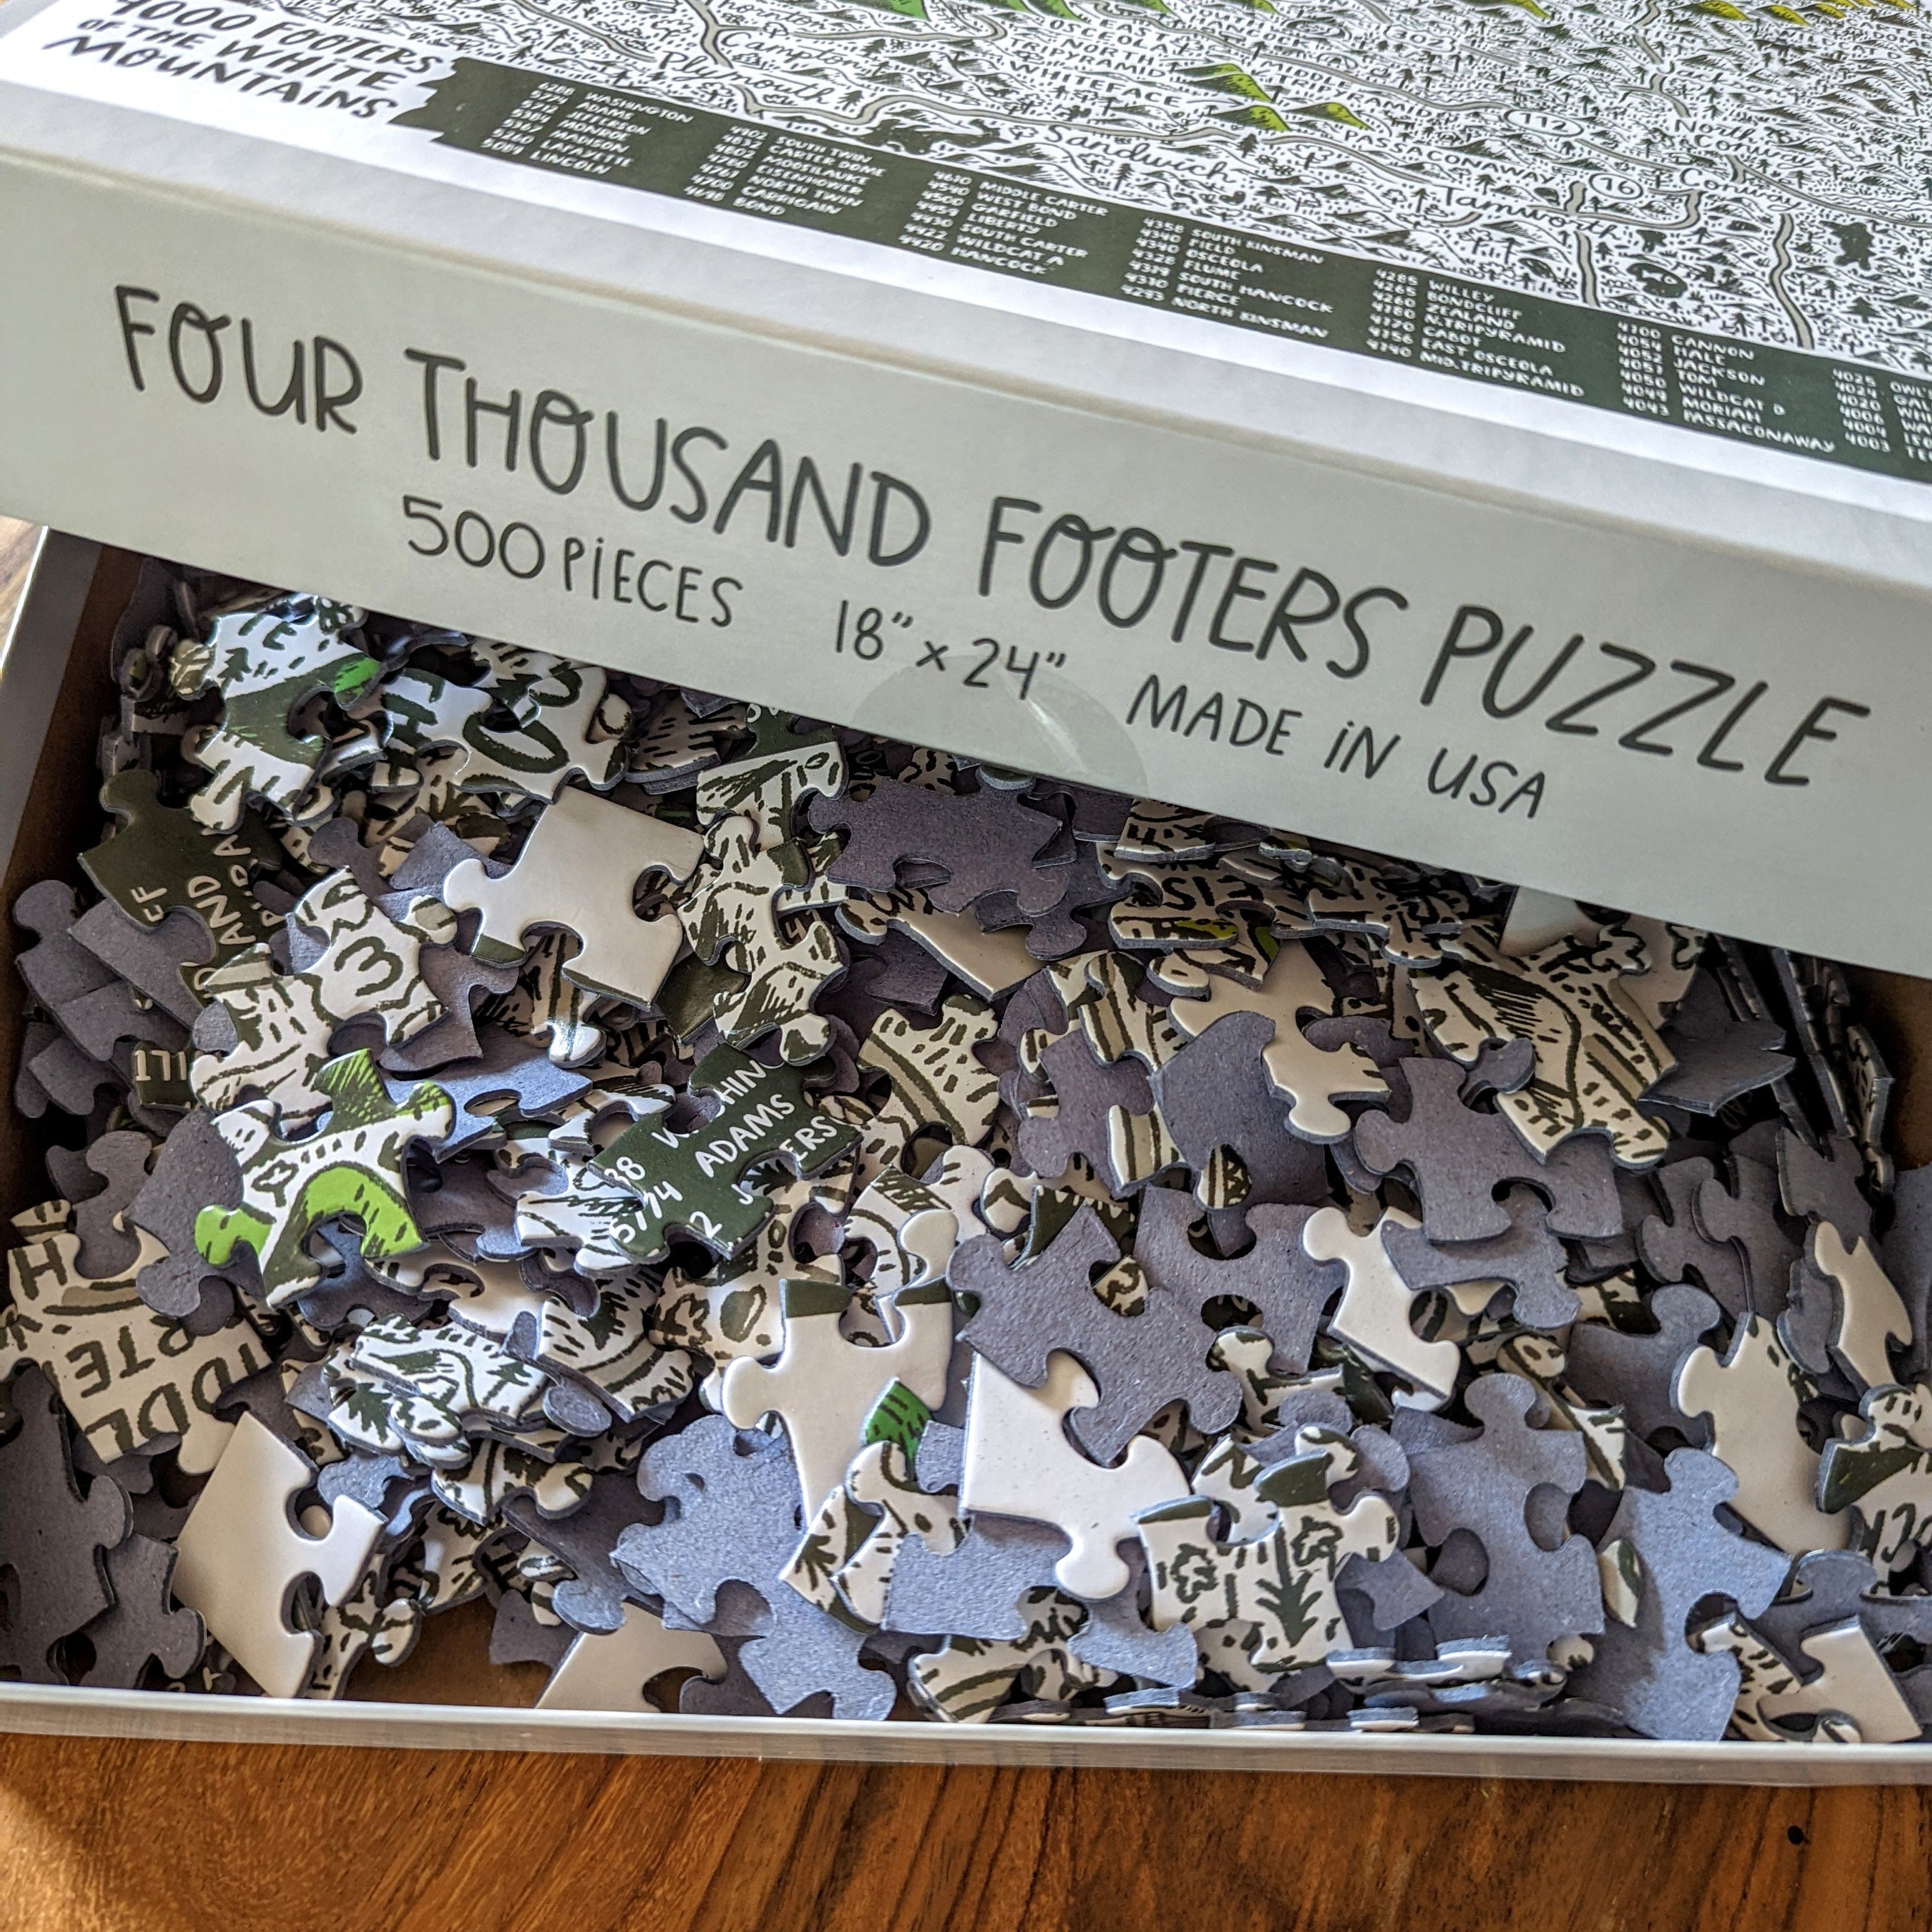 4000 Footers Puzzle